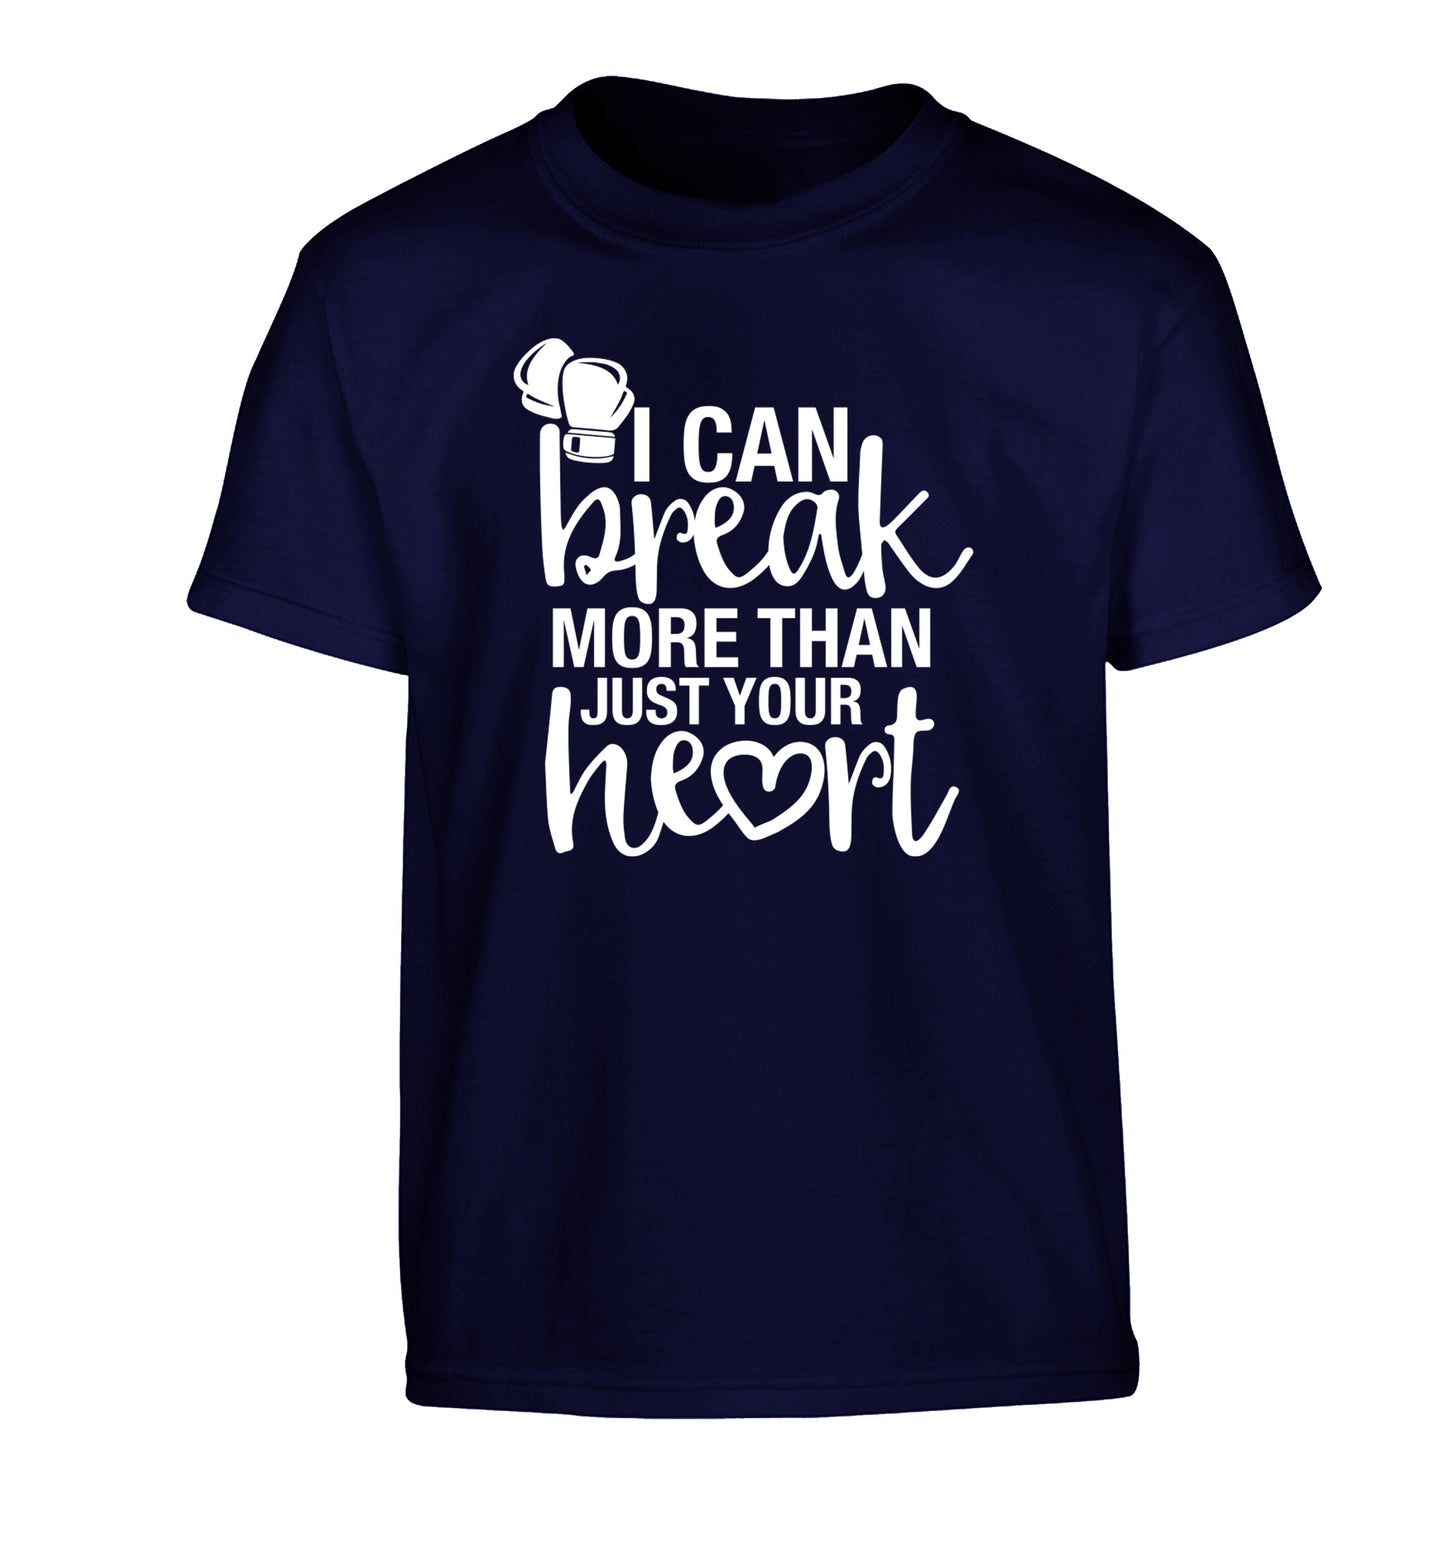 I can break more than just your heart Children's navy Tshirt 12-13 Years